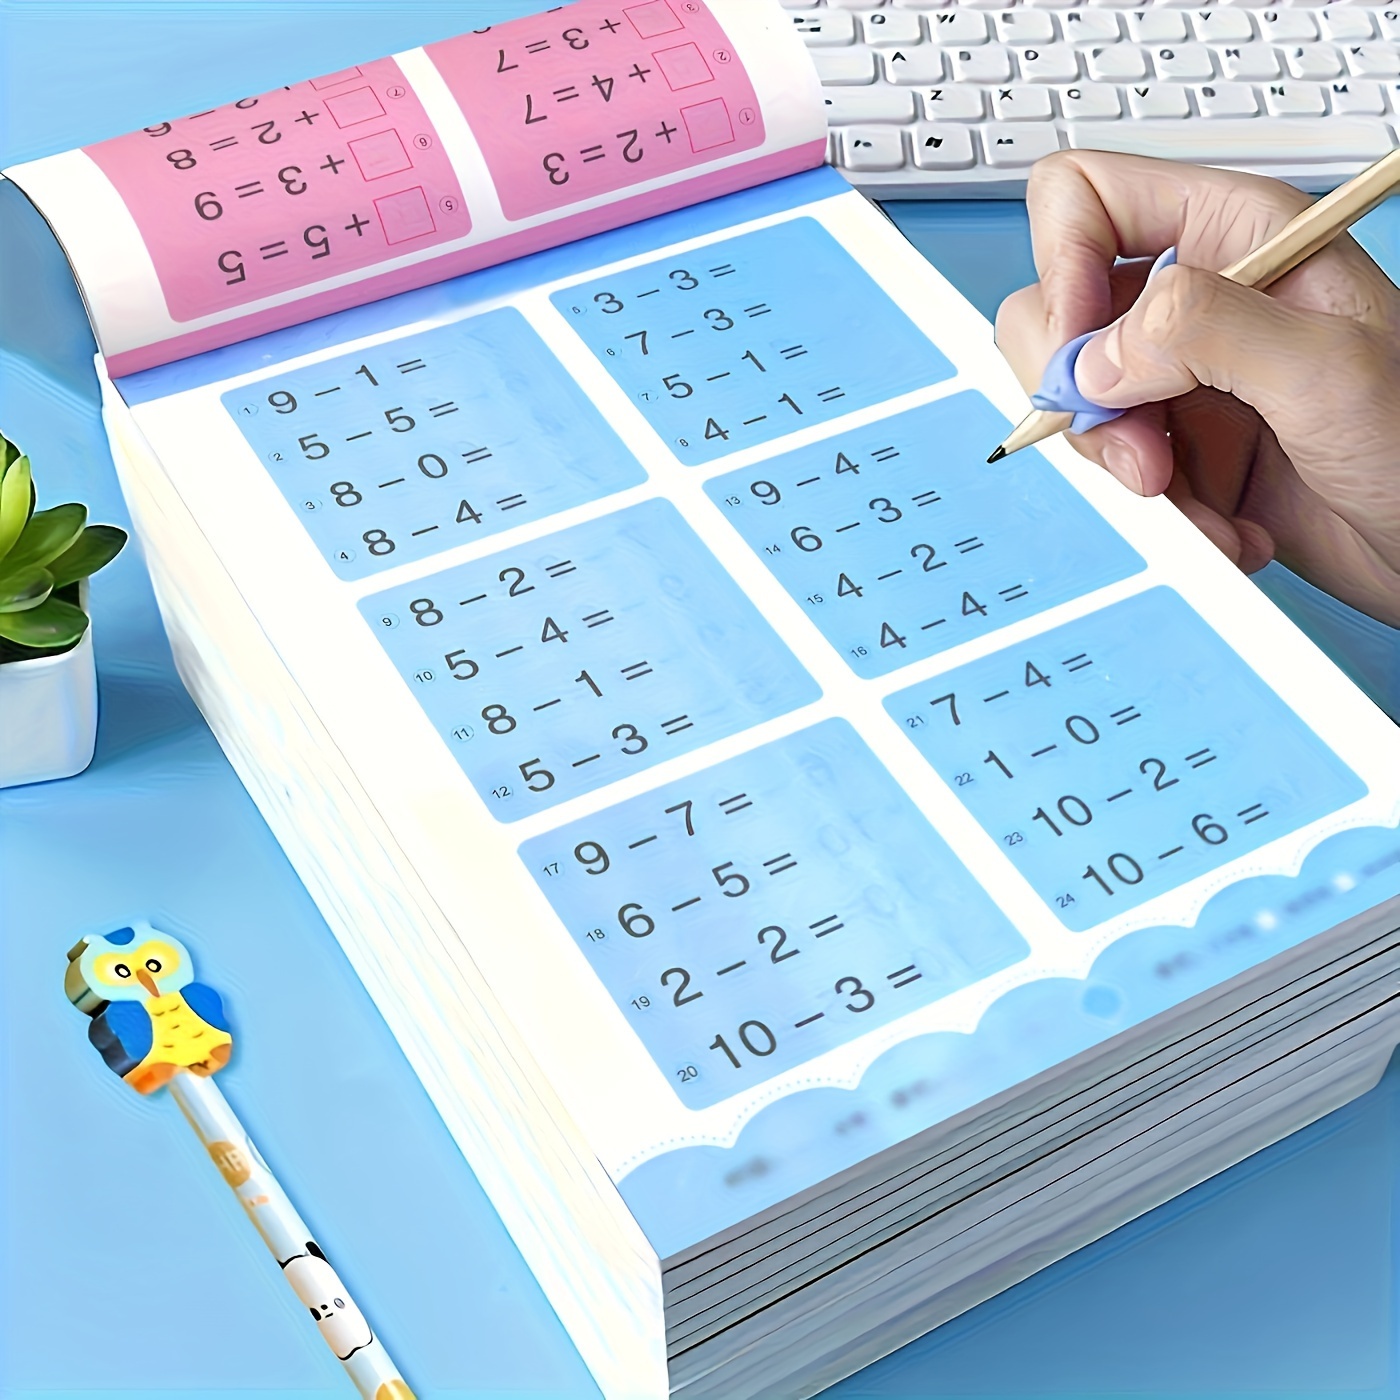 

Children's Addition And Subtraction Math Learning Exercise Book, Handwritten Arithmetic Exercise Book, Notebook (including Chinese Characters, But Does Not Affect Normal Use)